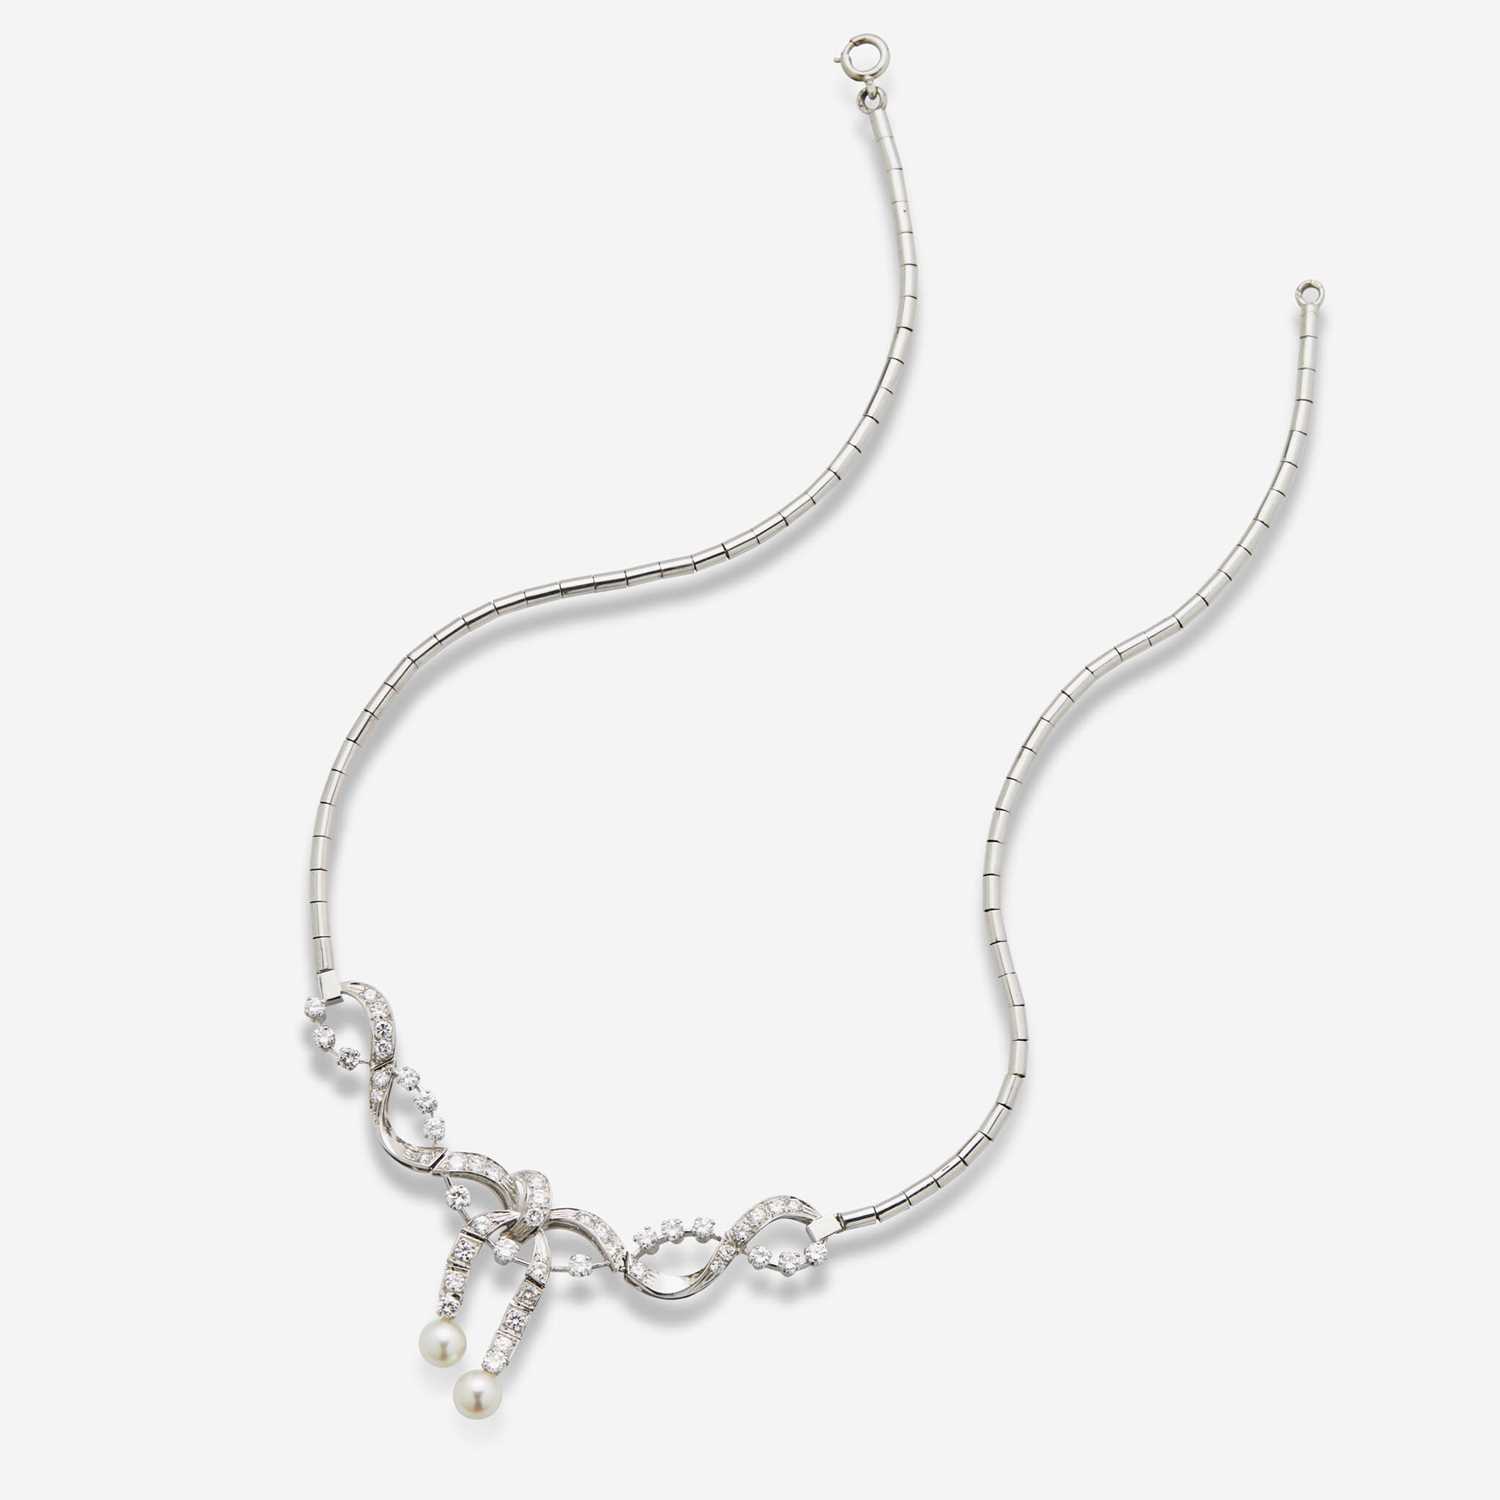 Lot 77 - A 14K White Gold, Diamond, and Pearl Necklace